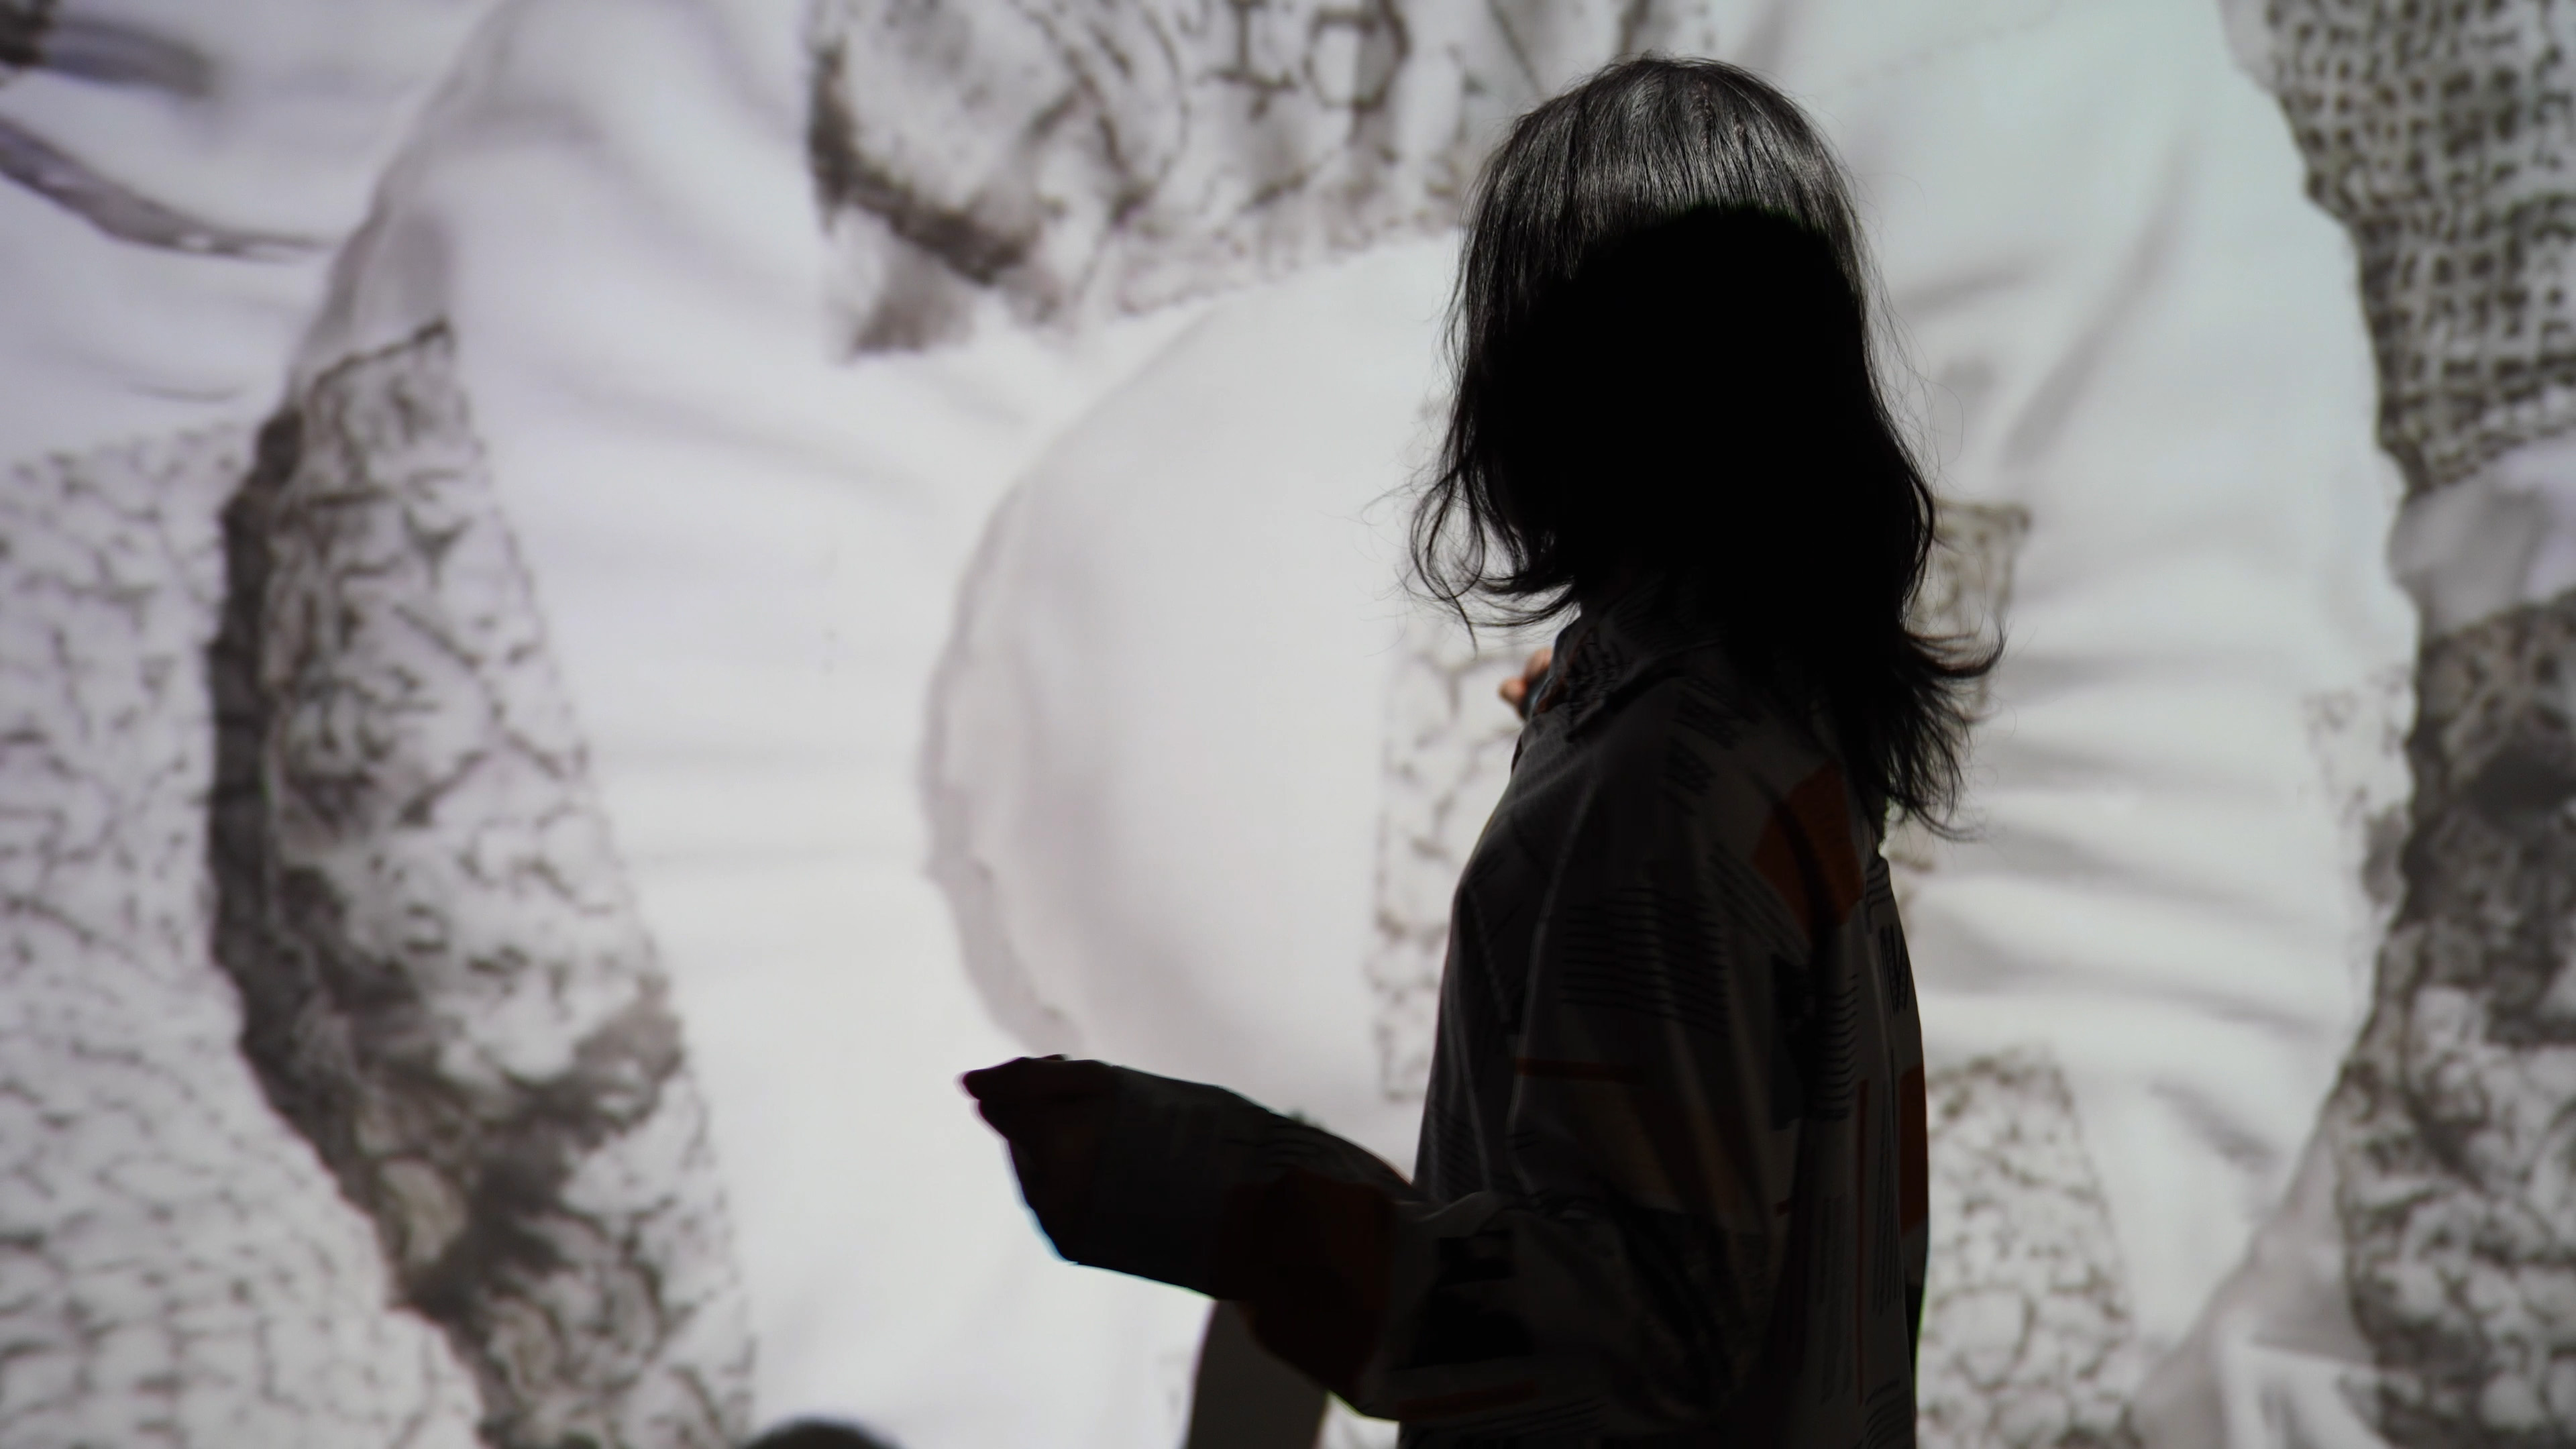 Experiential E-Textile Art Installation Reflects Image in Cloth.